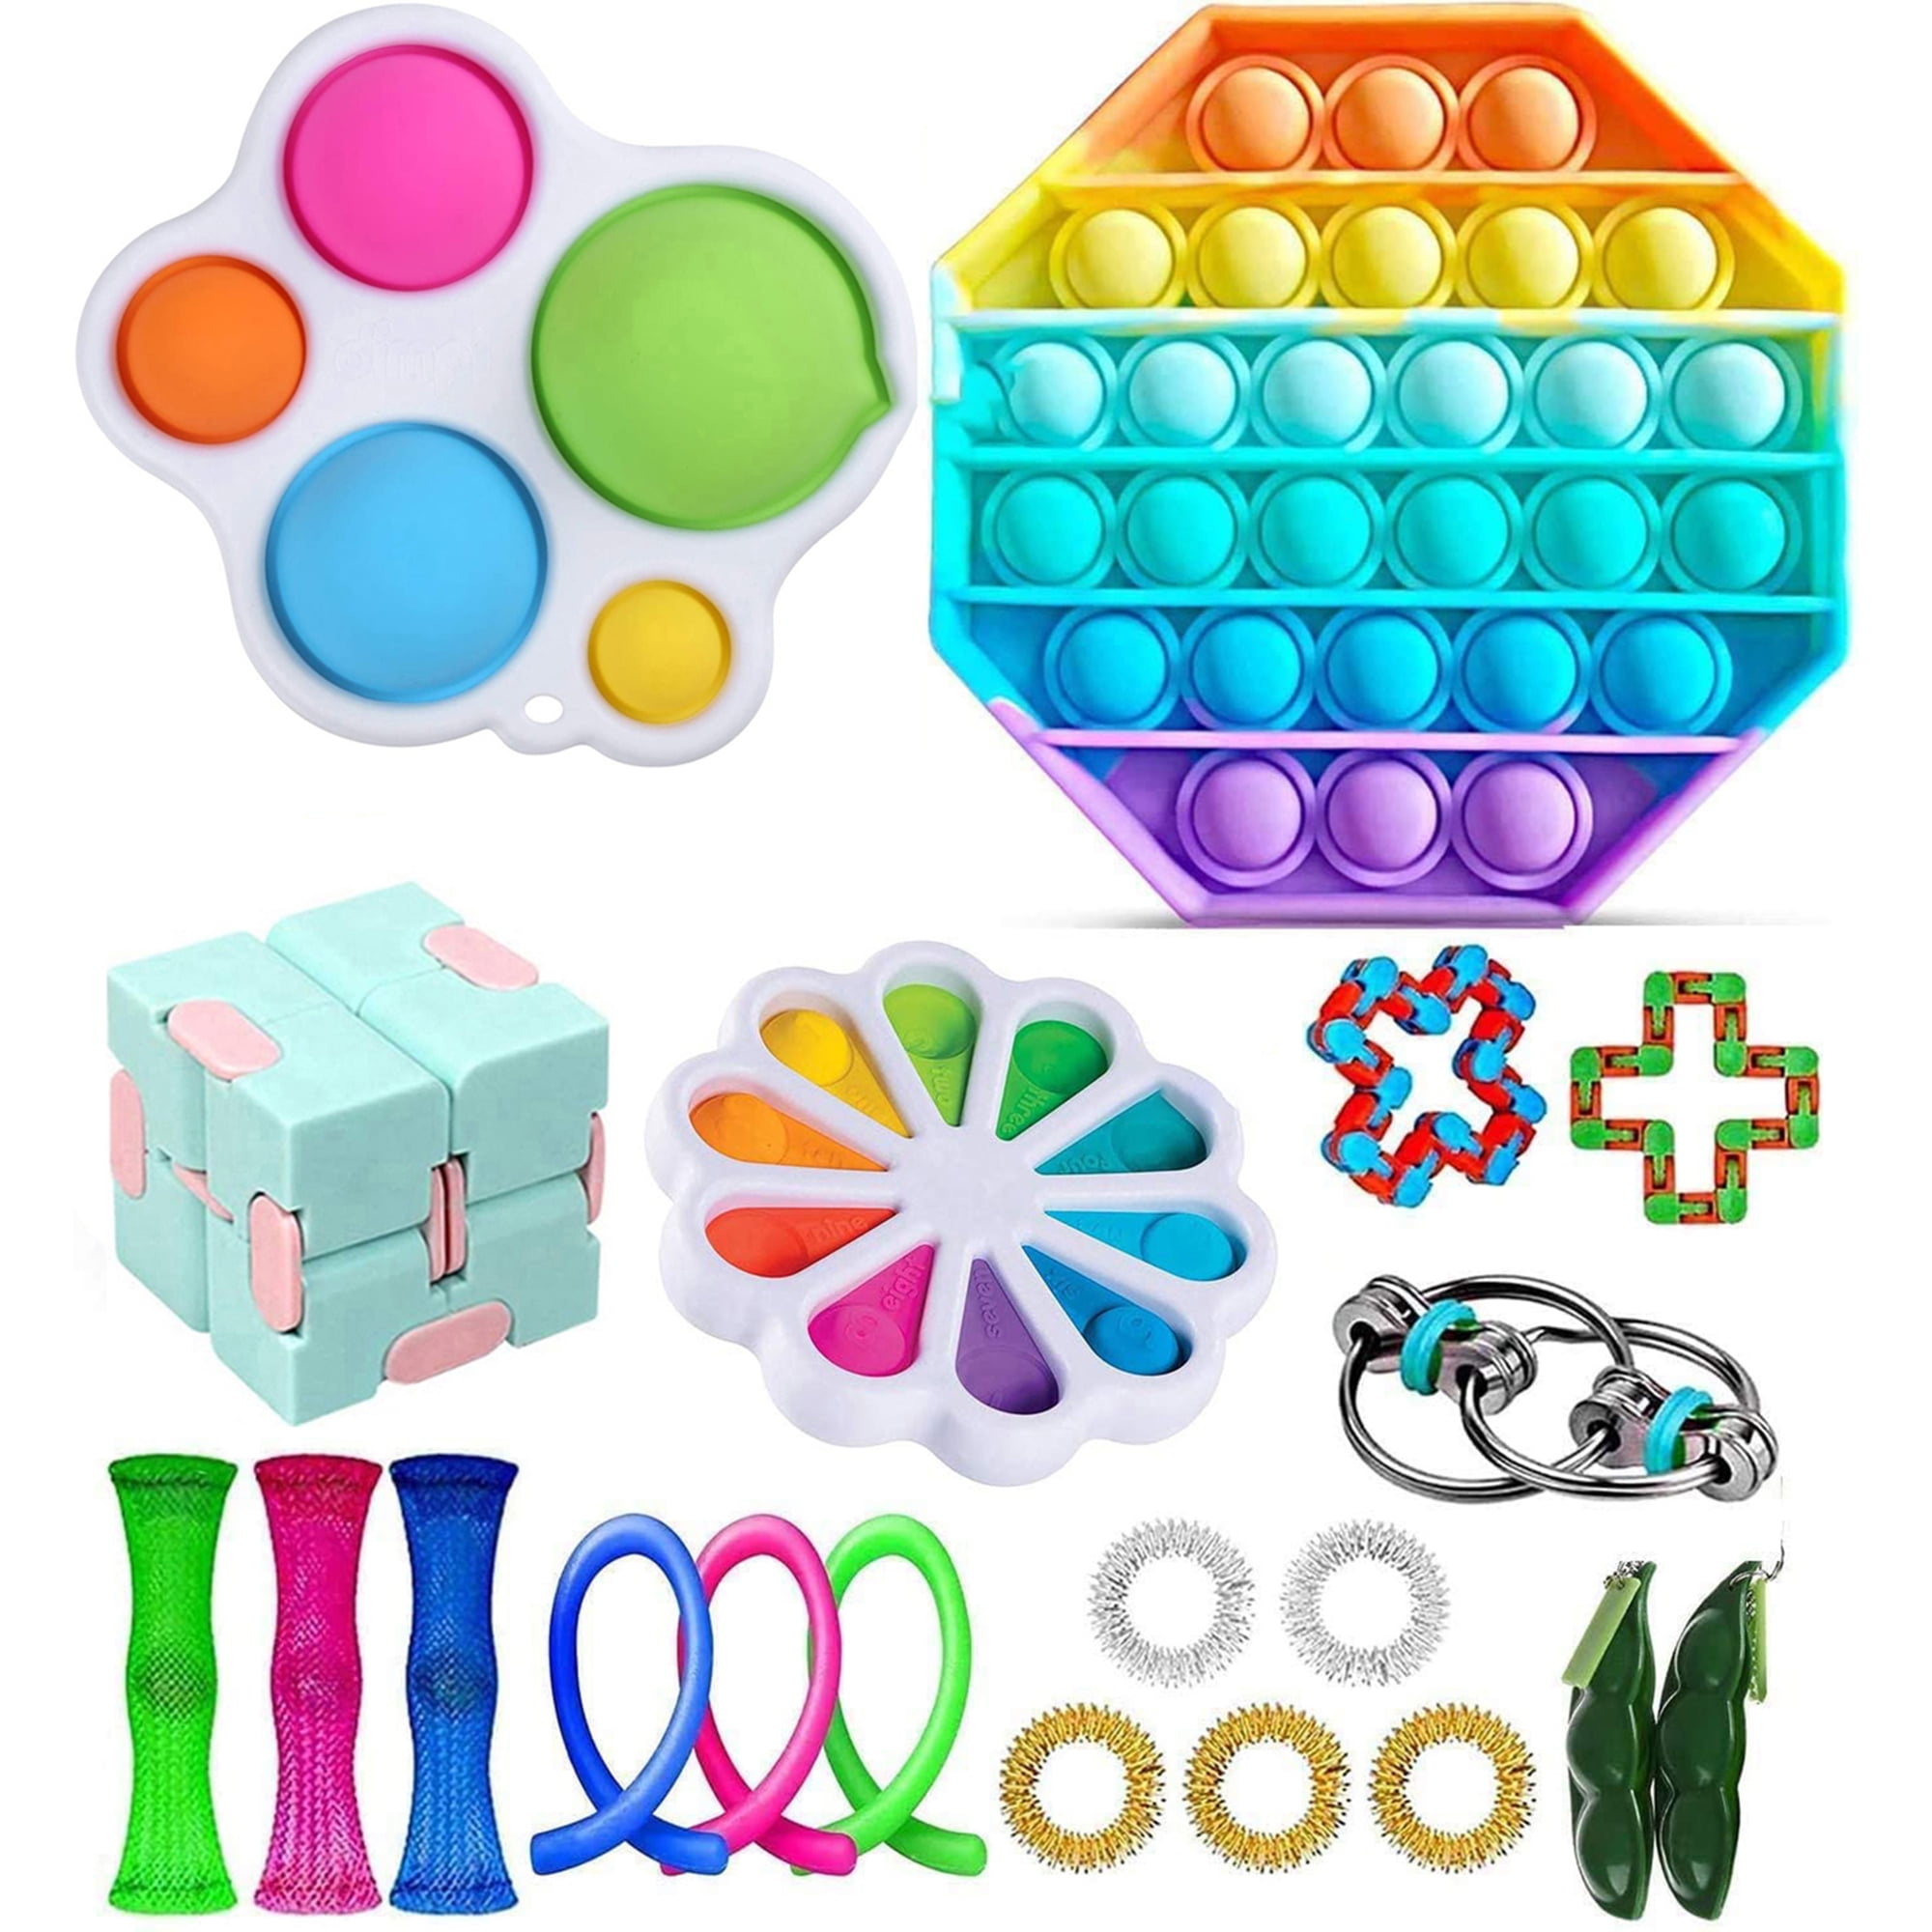 Details about   12 PCS Sensory Fidget Toys ADHD With Bubble Sensory Games Anxiety Relief Stress 